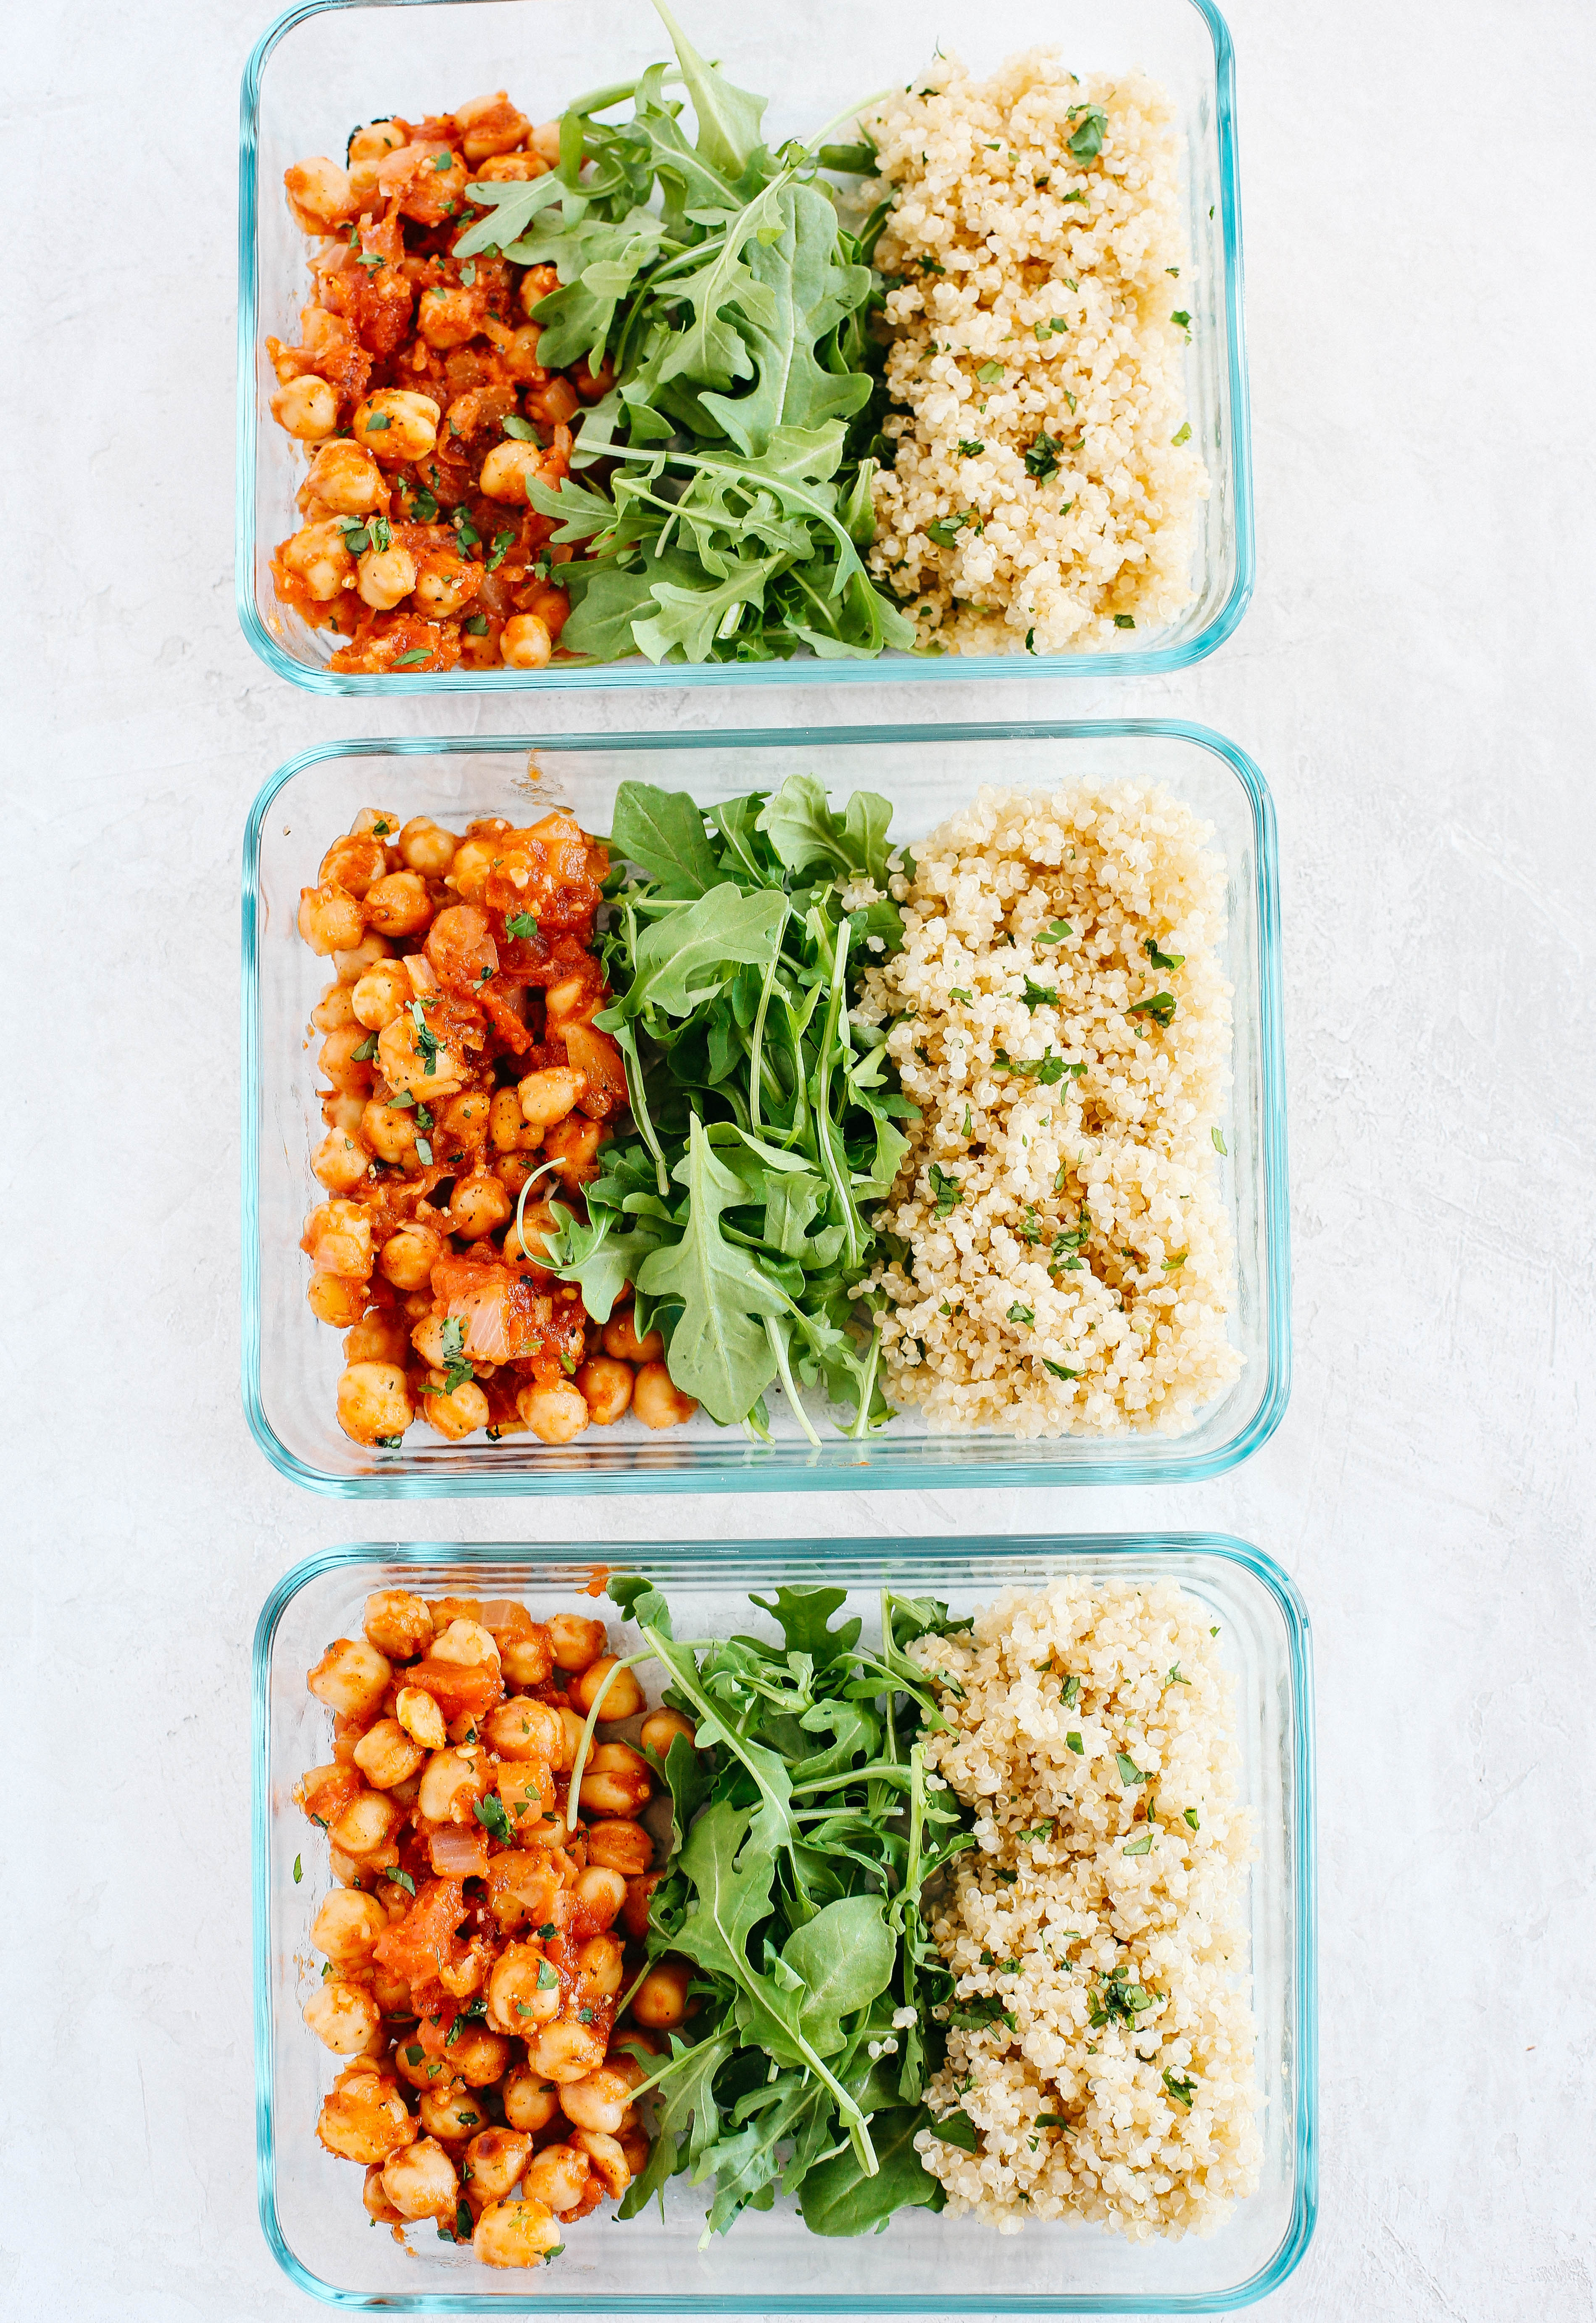 Spicy Chickpea and Quinoa Bowls perfect for meal prep! #vegan #glutenfree #mealprep